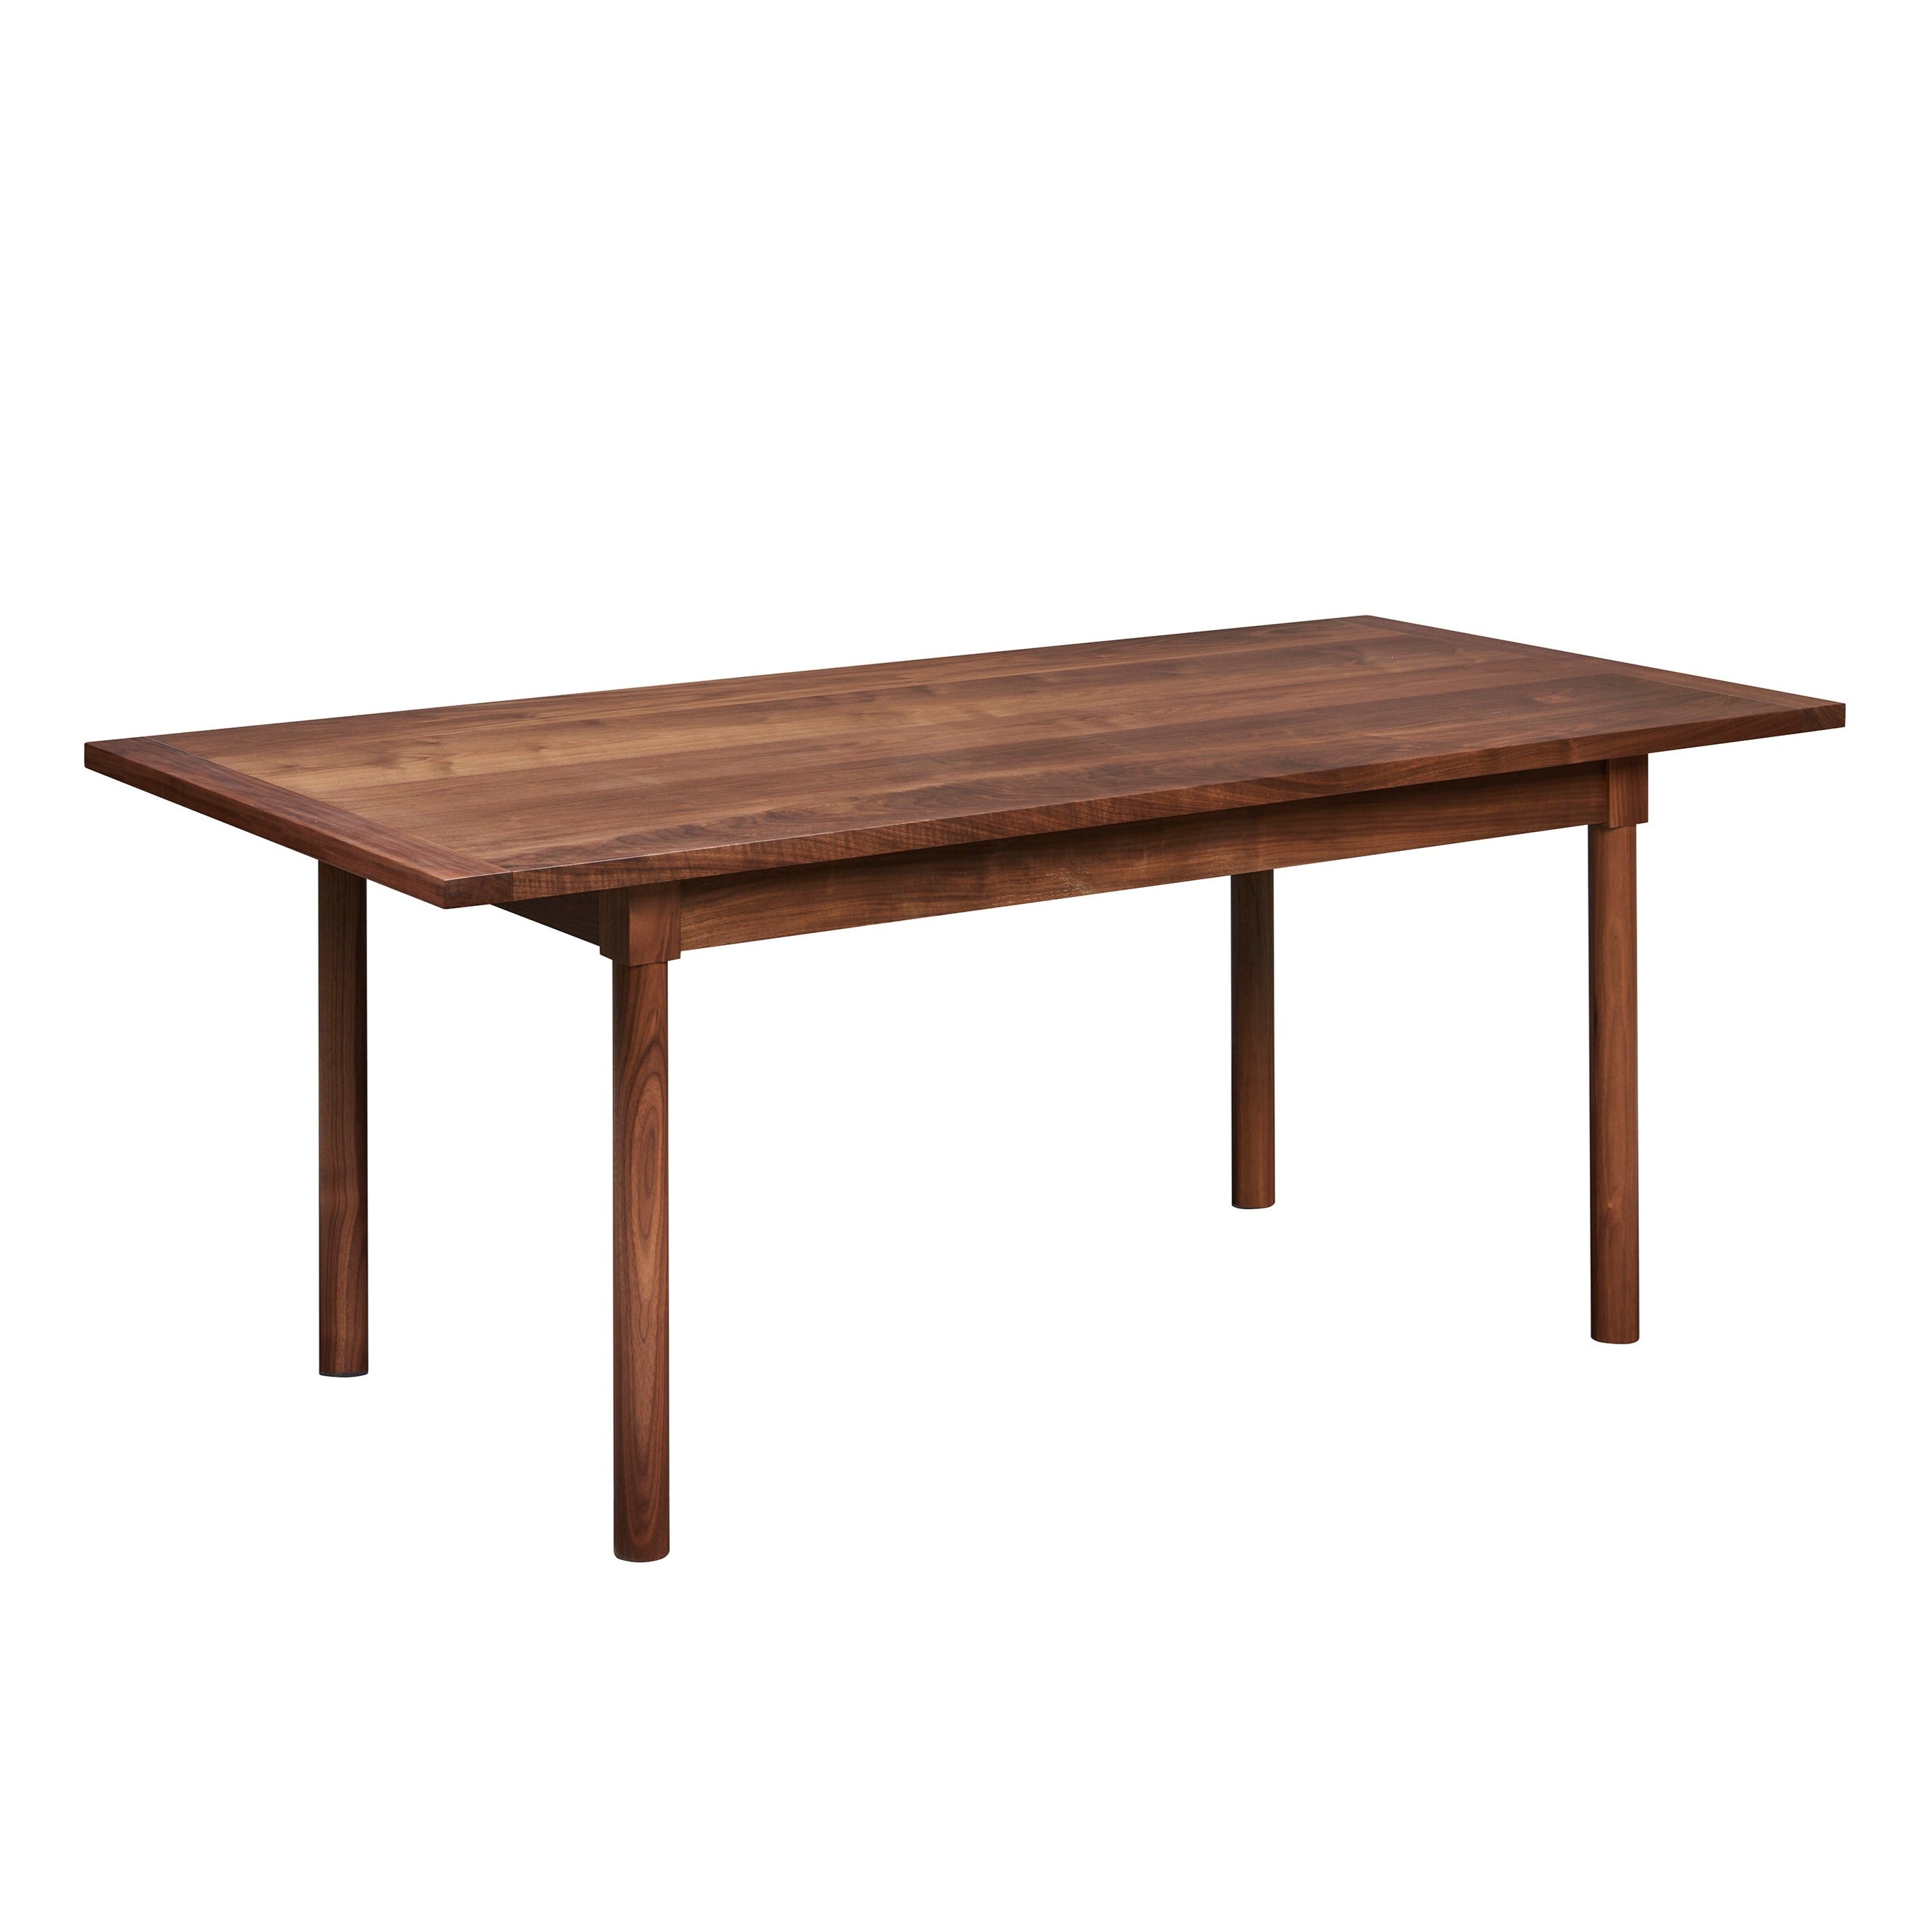 Modern Revelry dining table with straight turned legs and breadboard ends, built in solid walnut wood